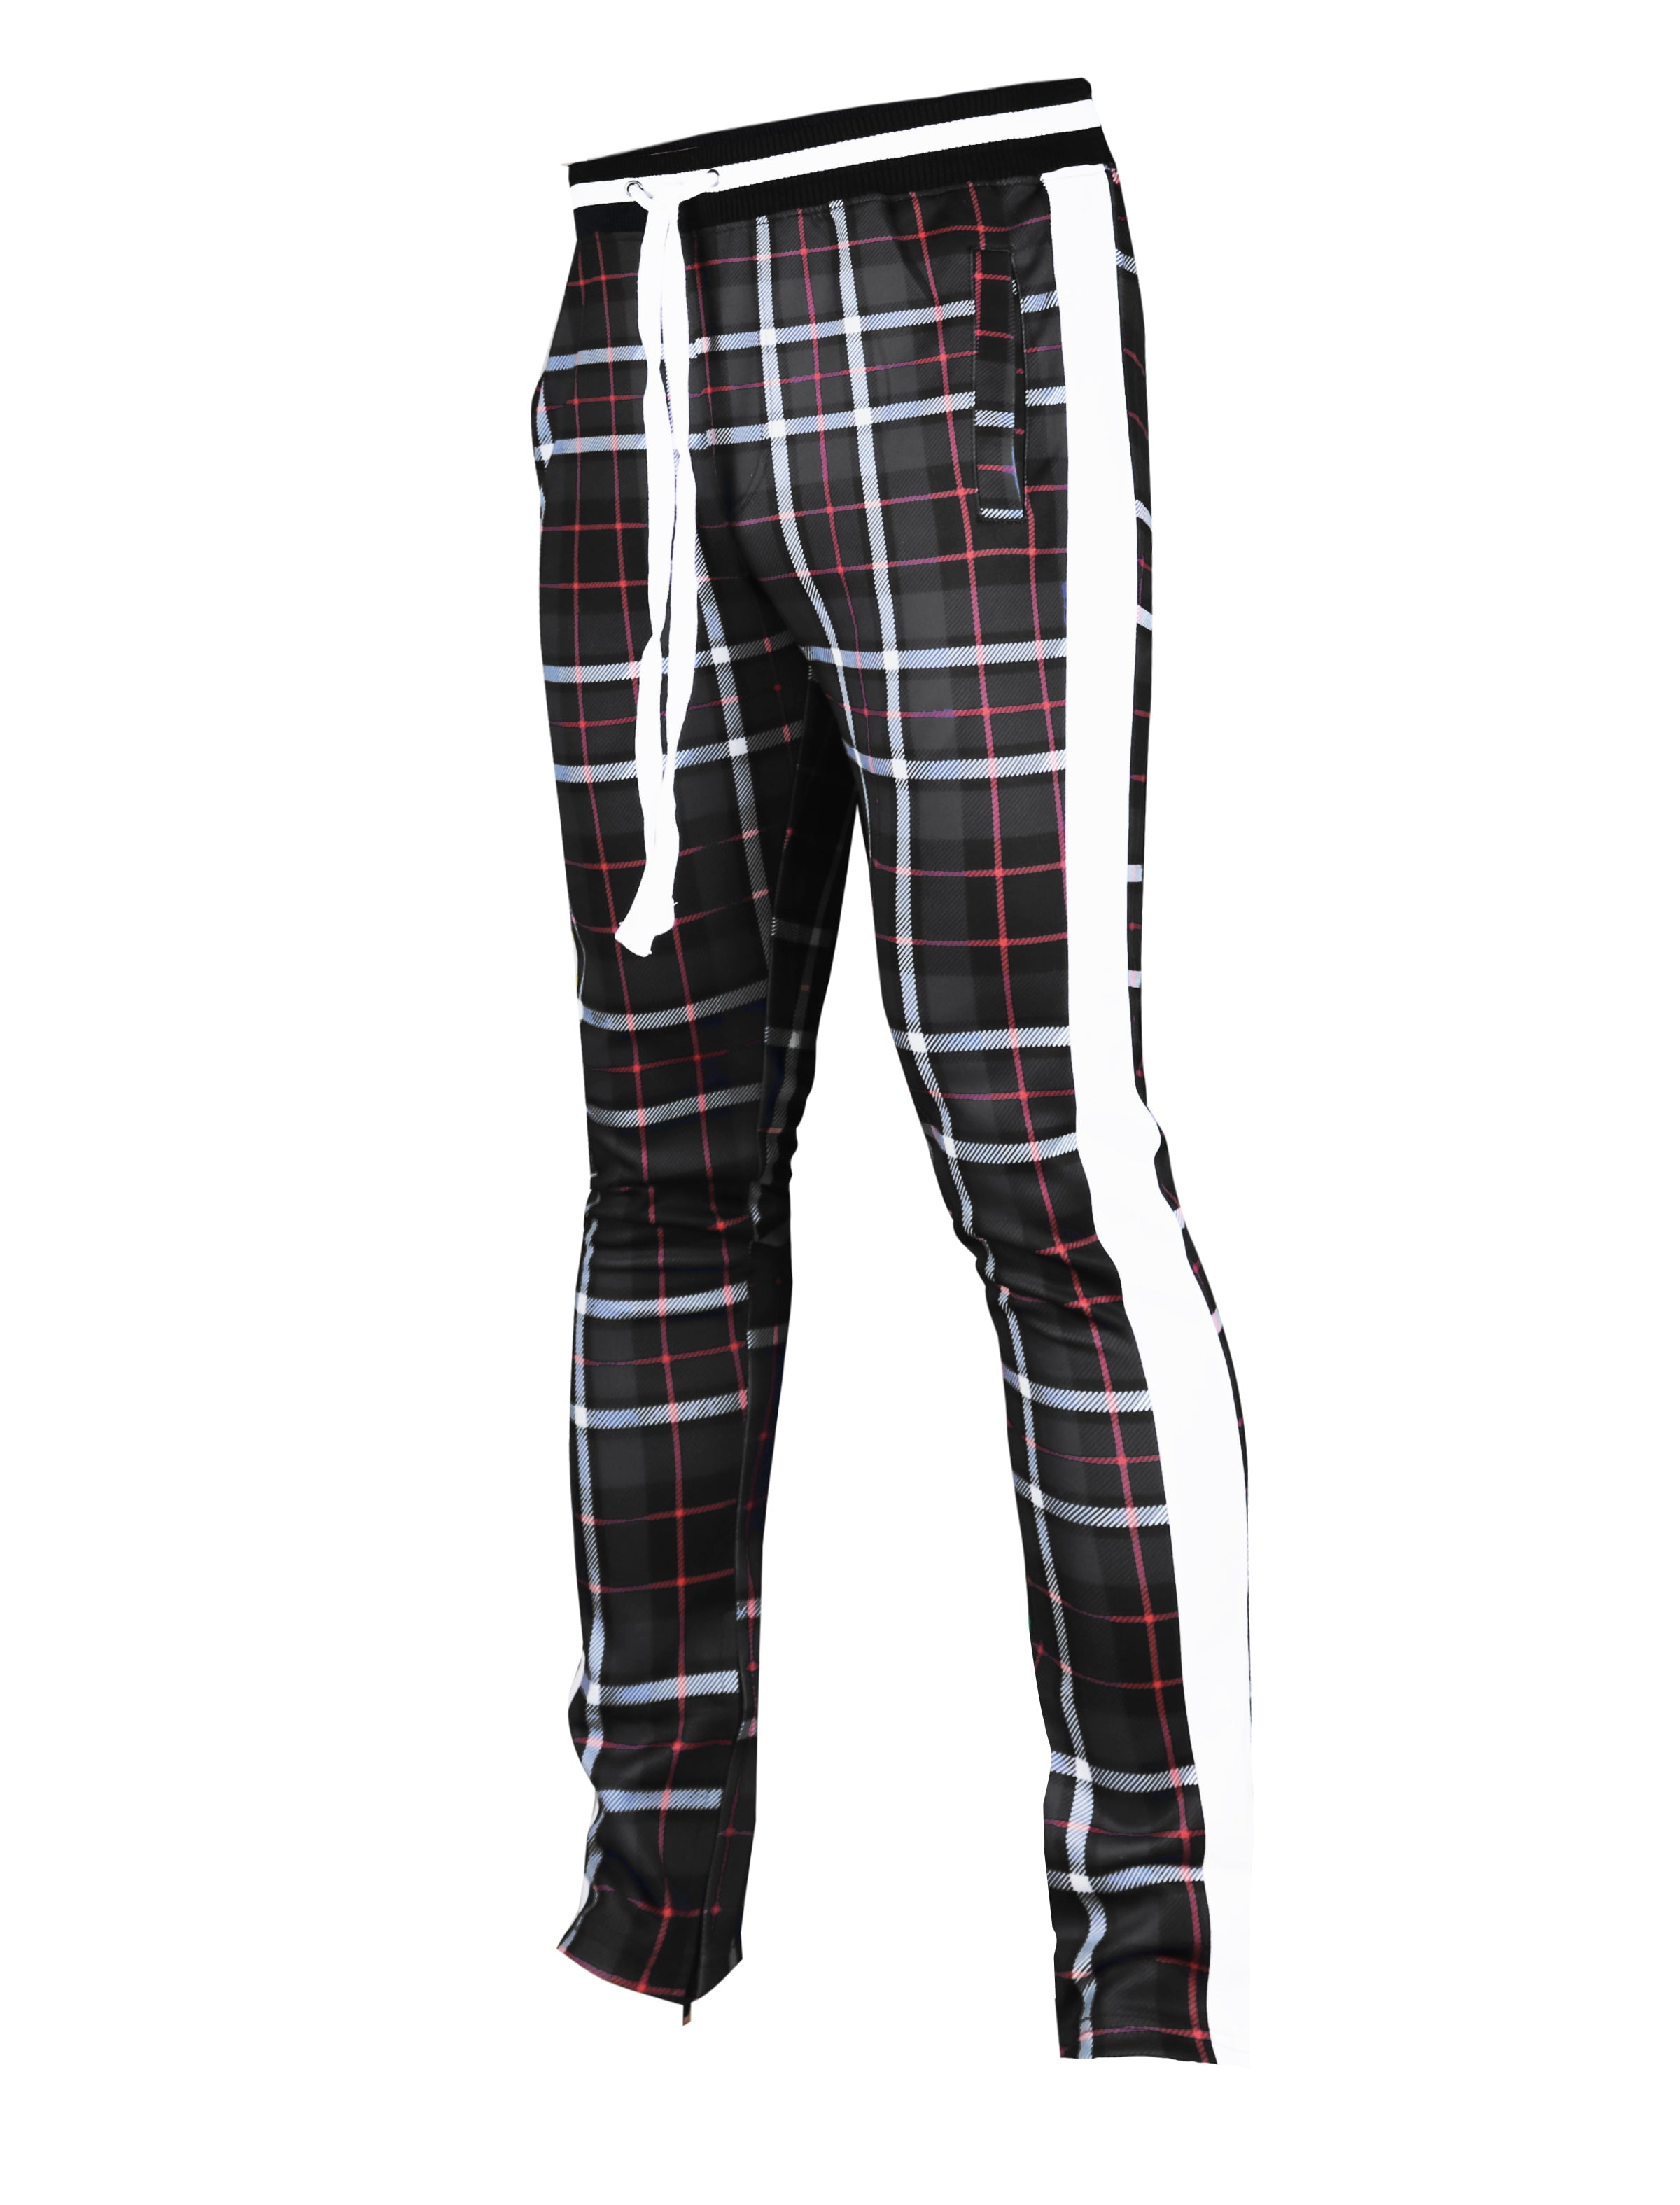 Hat and Beyond Premium Crisscross Track Pants Pattern Active Hip Hop  Streetwear, 1vw65_white, X-Large : Amazon.in: Clothing & Accessories